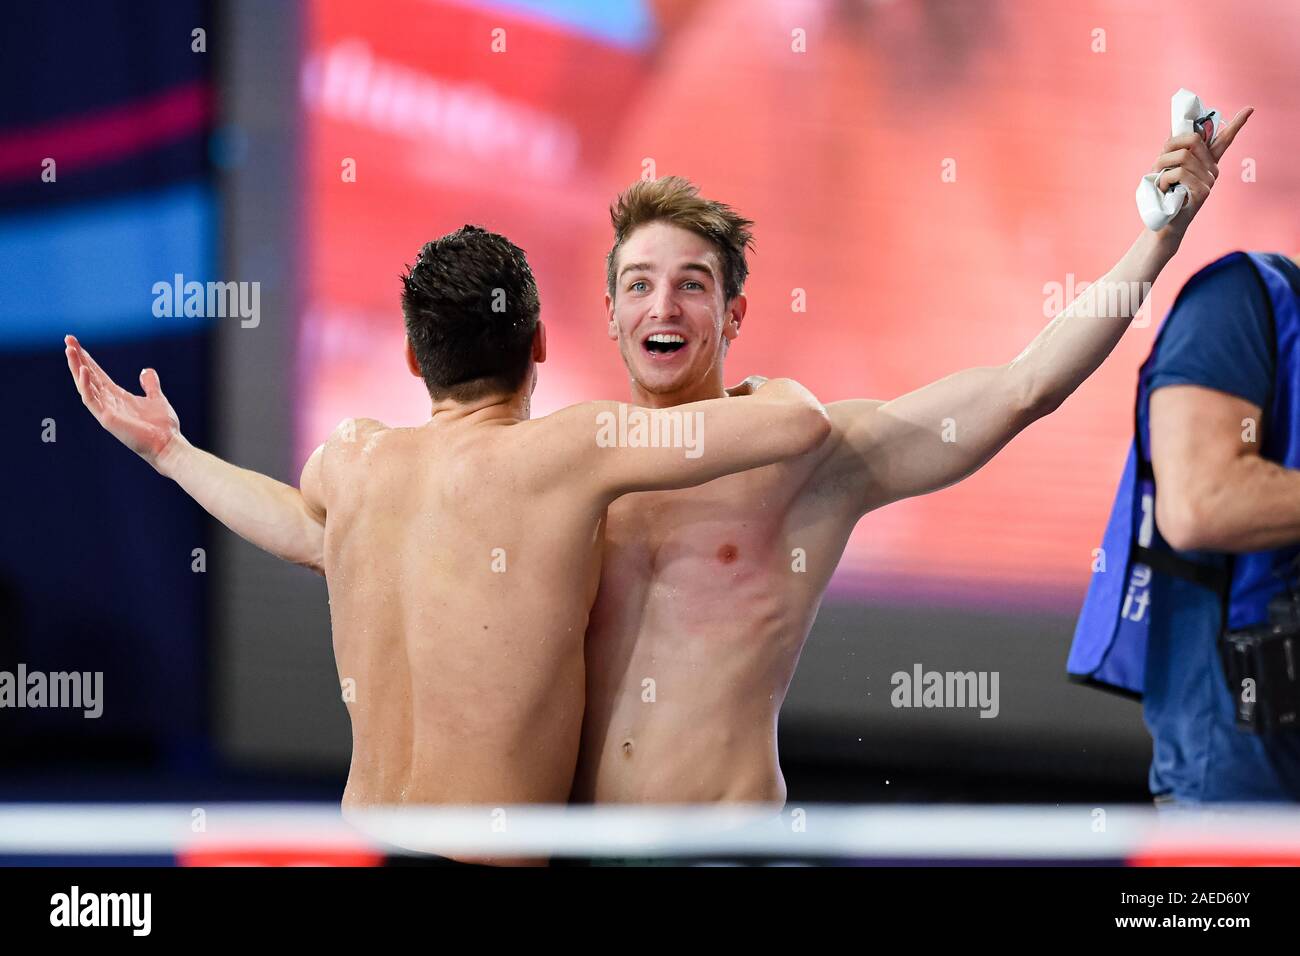 Glasgow, Scotland, UK.  08th Dec, 2019. Richard Bohus of Hungary celebrates with team mate after winning the Men's 4 x 50M Medley Final during Final day of the LEN European Short Course Swimming Championships 2019 at Tollcross International Swimming Centre on Sunday, 08 December 2019. GLASGOW SCOTLAND. Credit: Taka G Wu/Alamy Live News Stock Photo